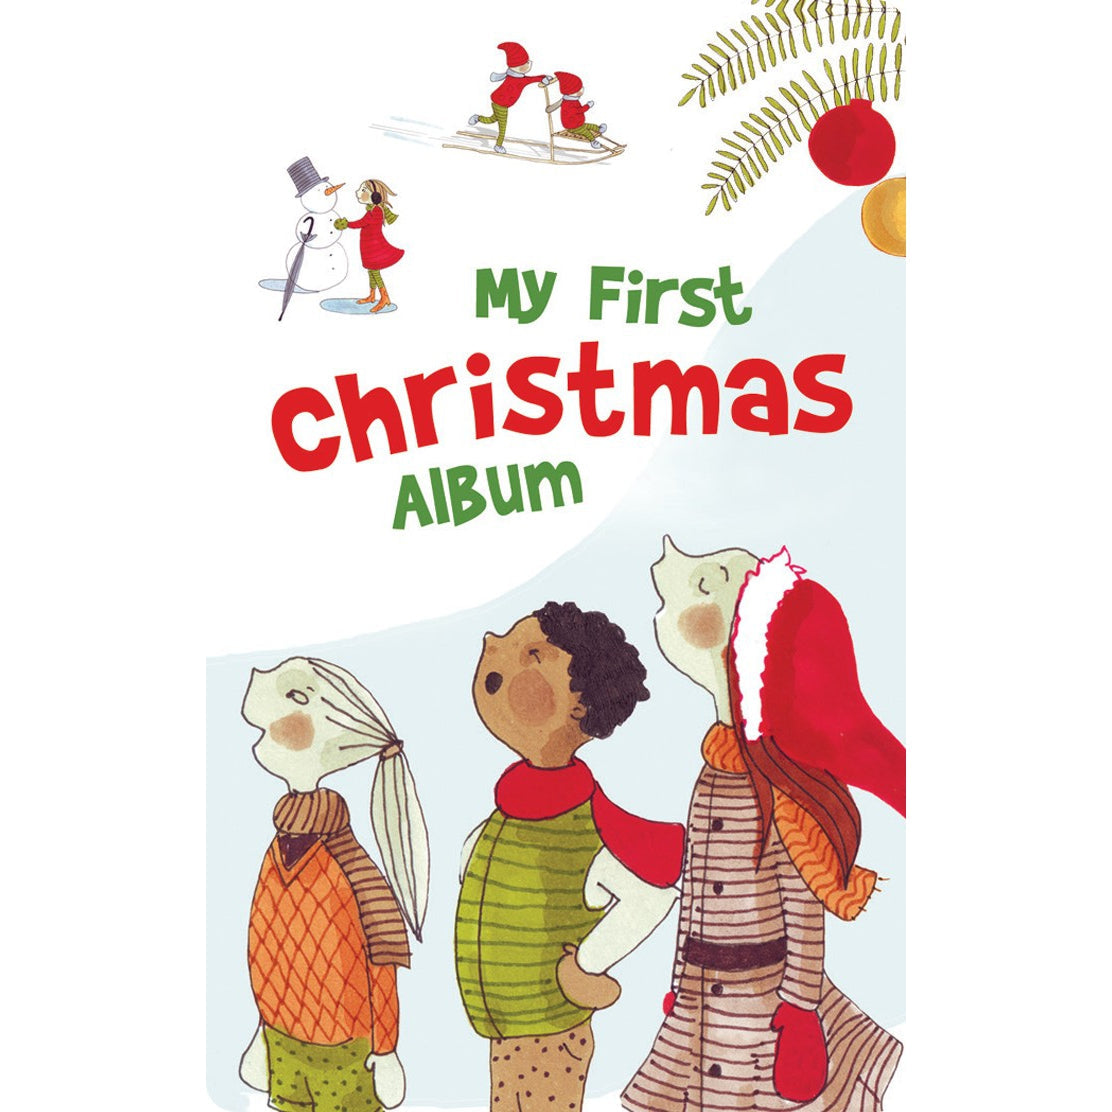 Yoto Card - My First Christmas Album - Child Friendly Audio Story Card for the Yoto Player